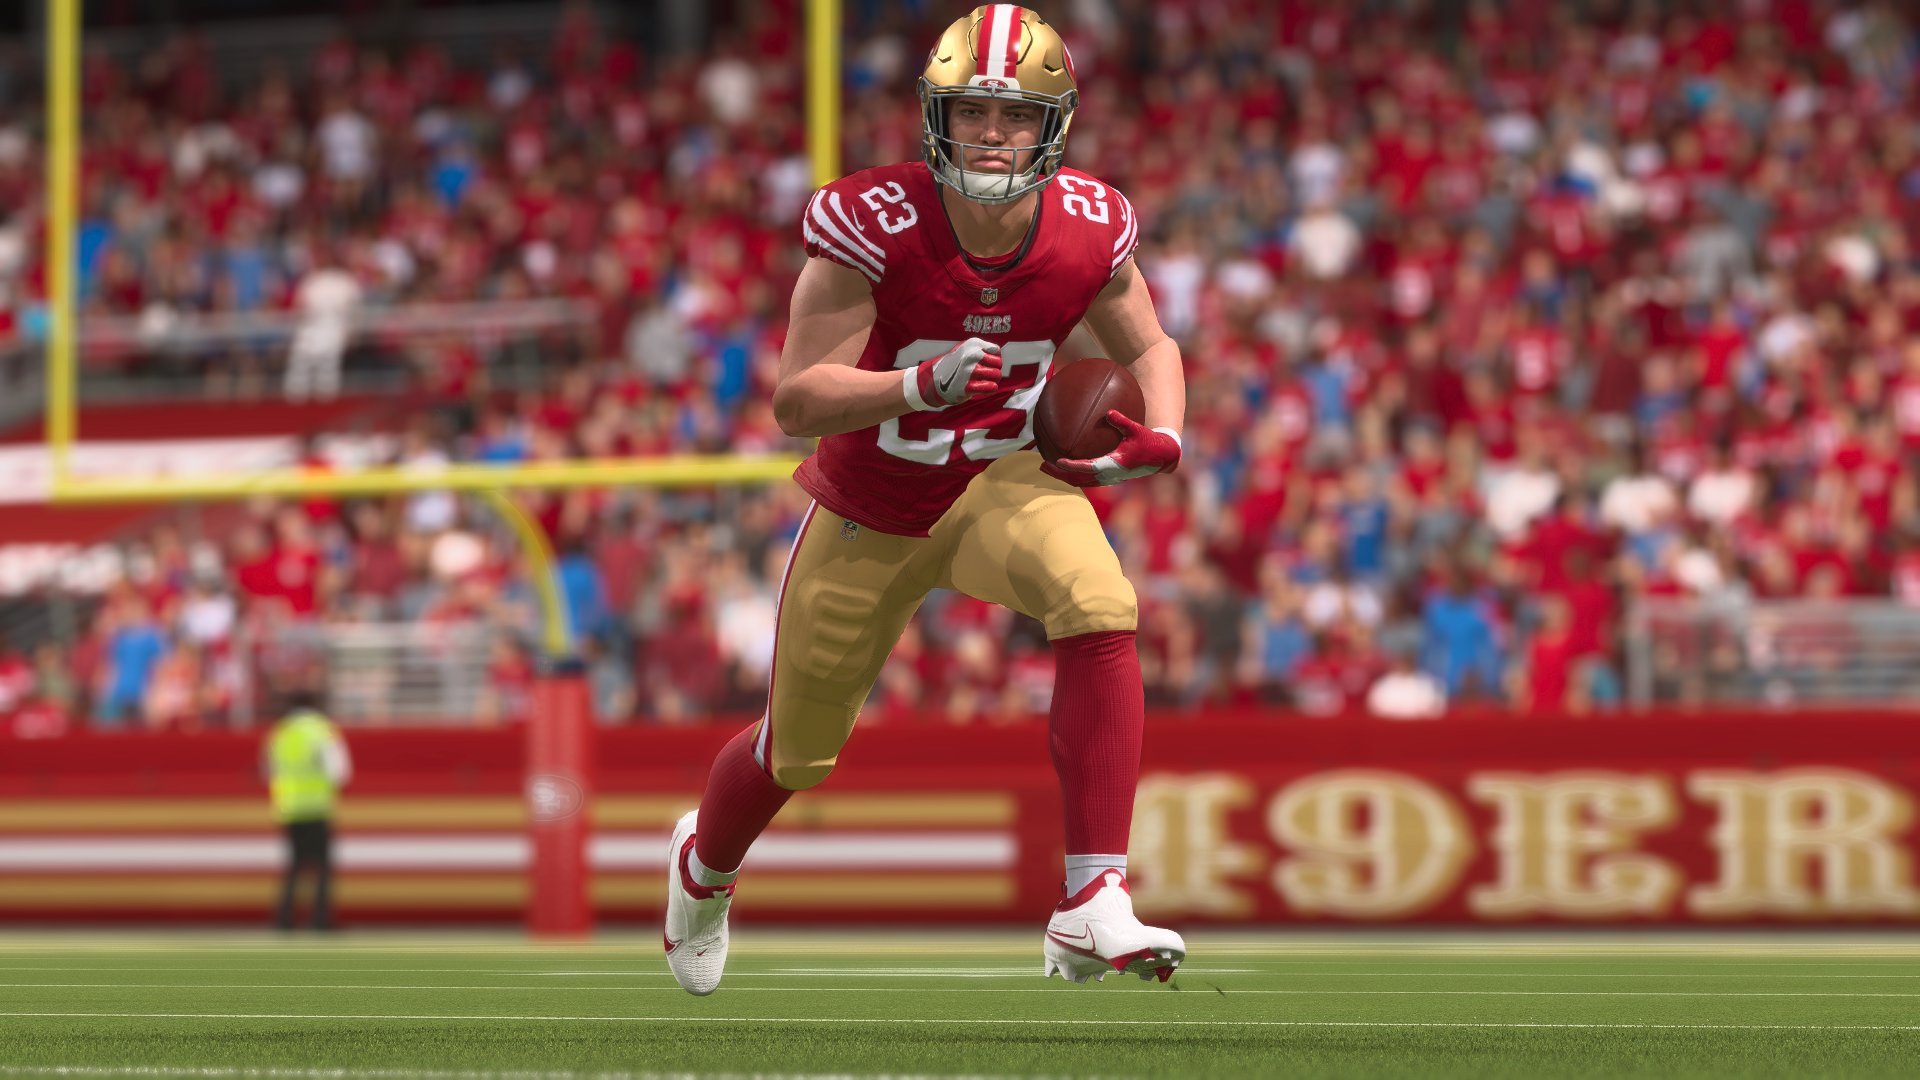 Madden 23 Patch Notes: Franchise Bugs May Finally Be Fixed - GameSpot